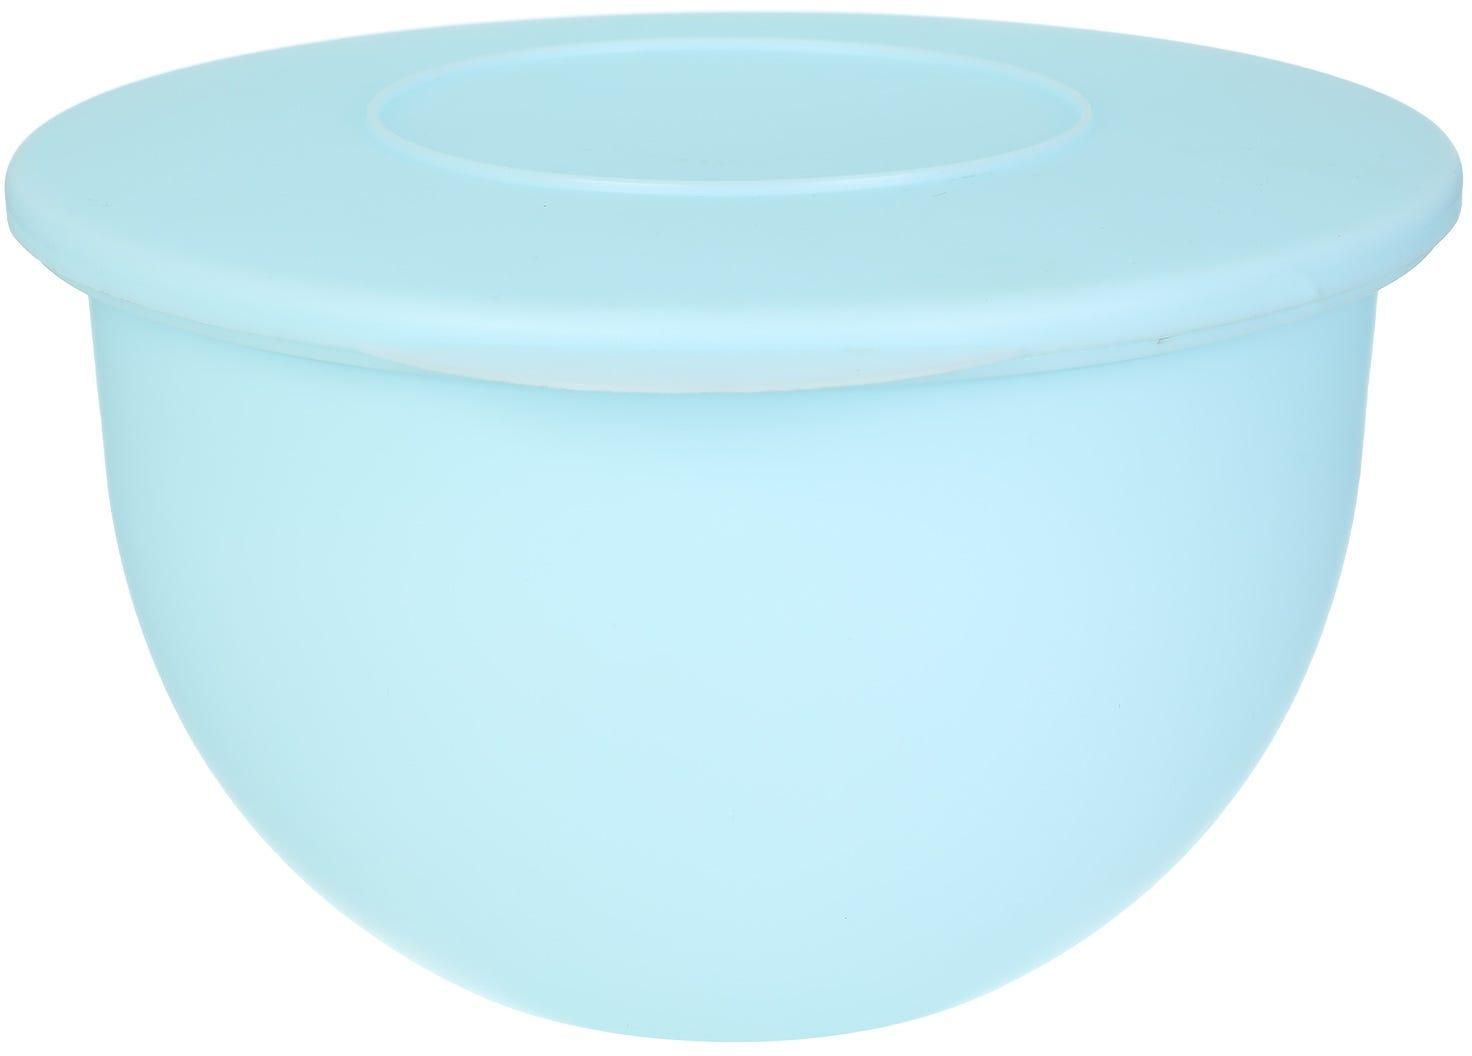 Get SoniPure Round Plastic bowl with inner strainer and lid, 26×16 cm - Light Blue with best offers | Raneen.com